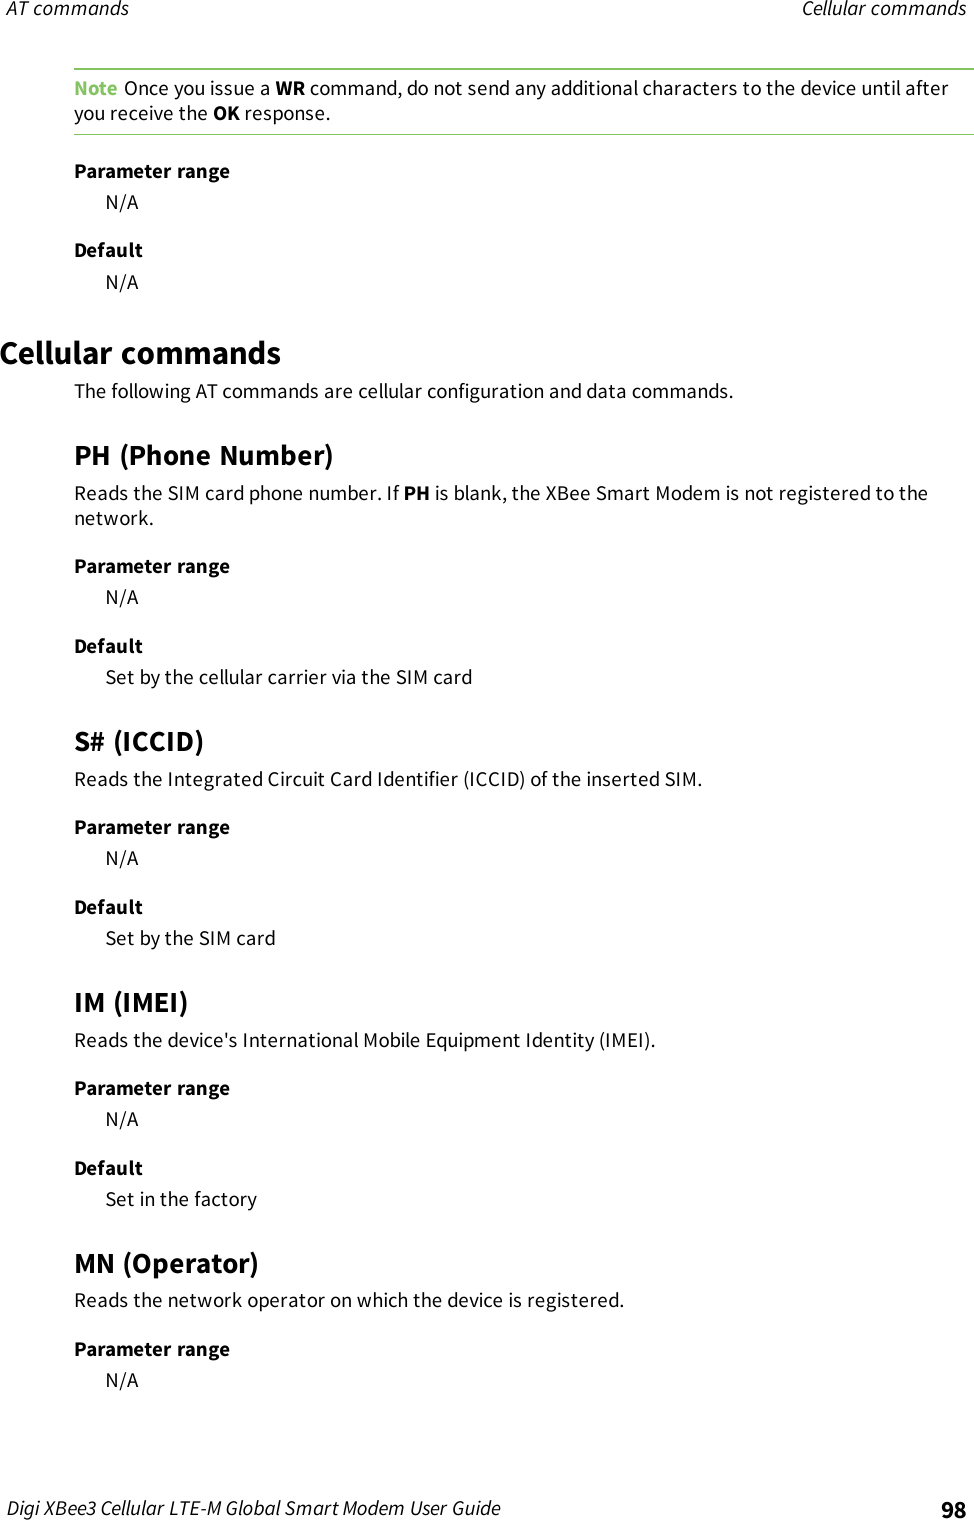 Page 98 of Digi XB3M1 XBee3 Cellular LTE-M User Manual 